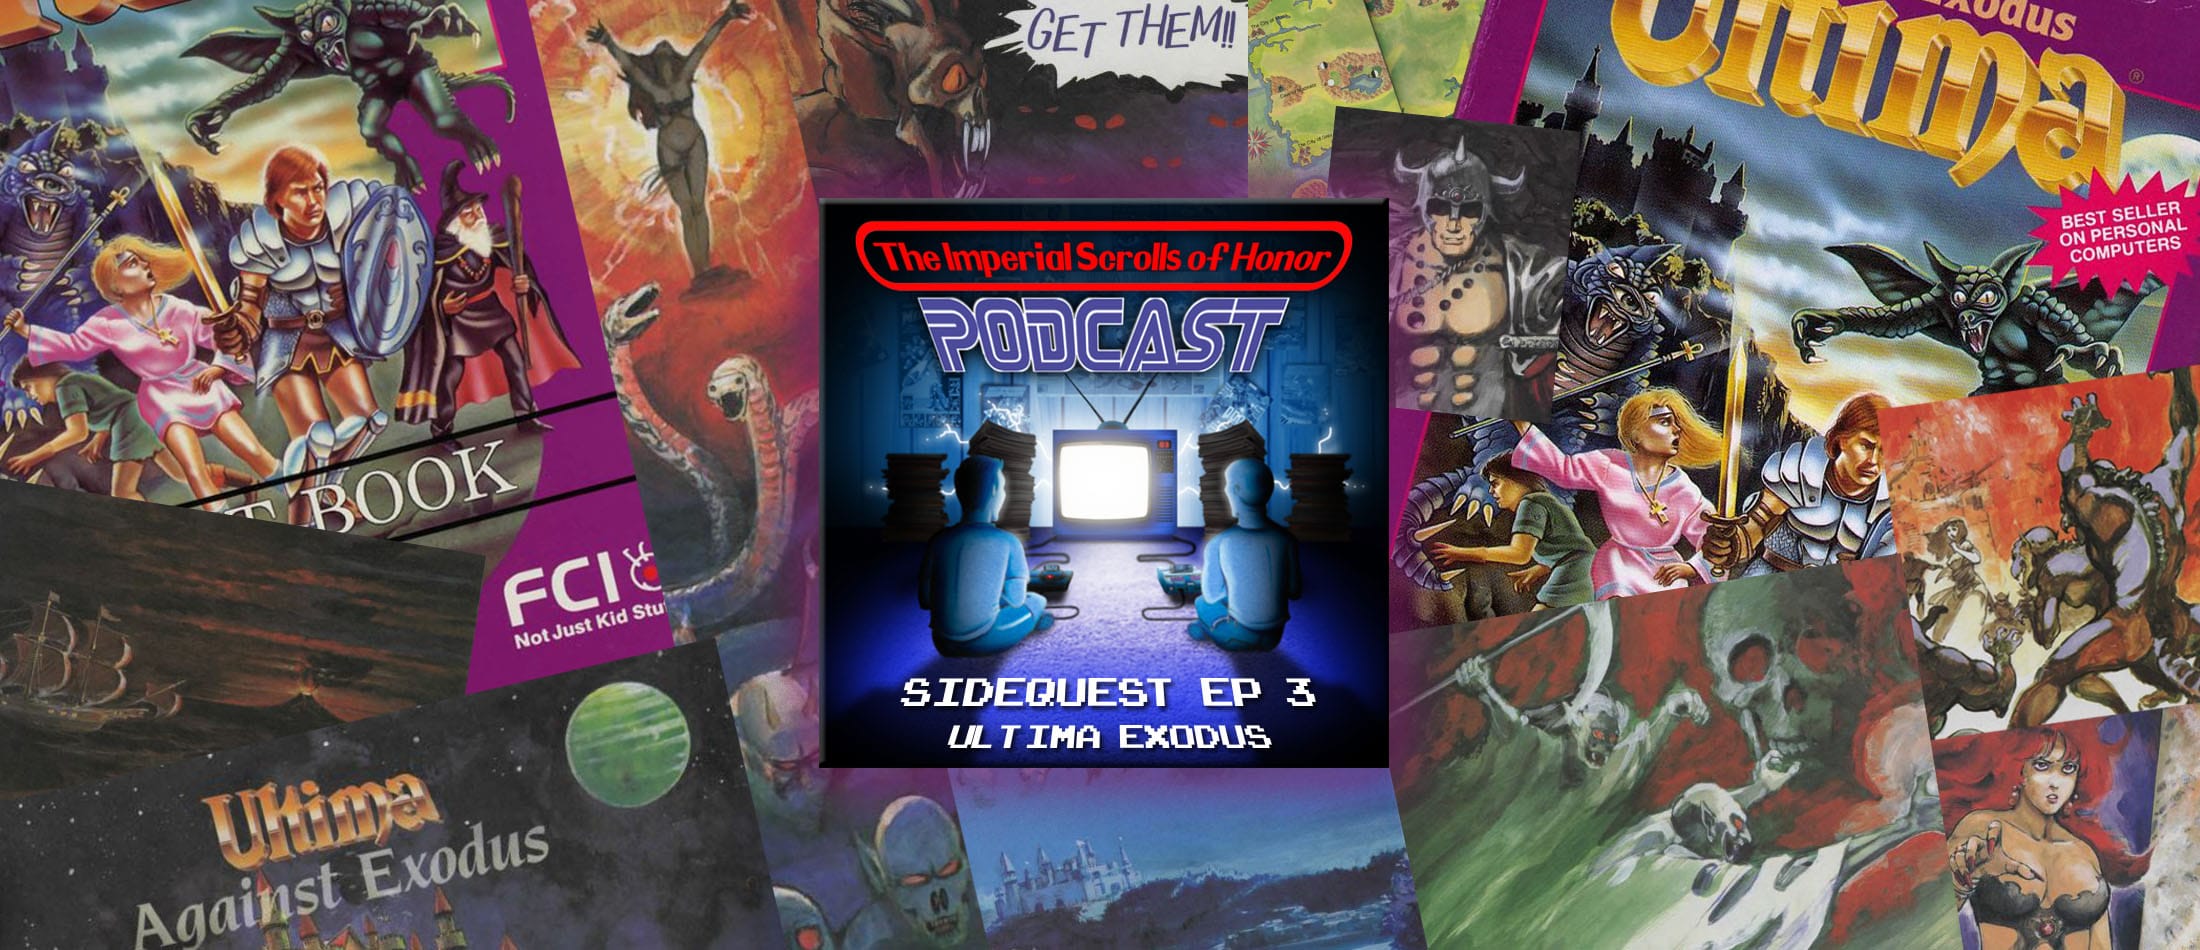 The Imperial Scrolls of Honor Podcast - SIDEQUEST Ep 3 - Ultima: Exodus (NES)